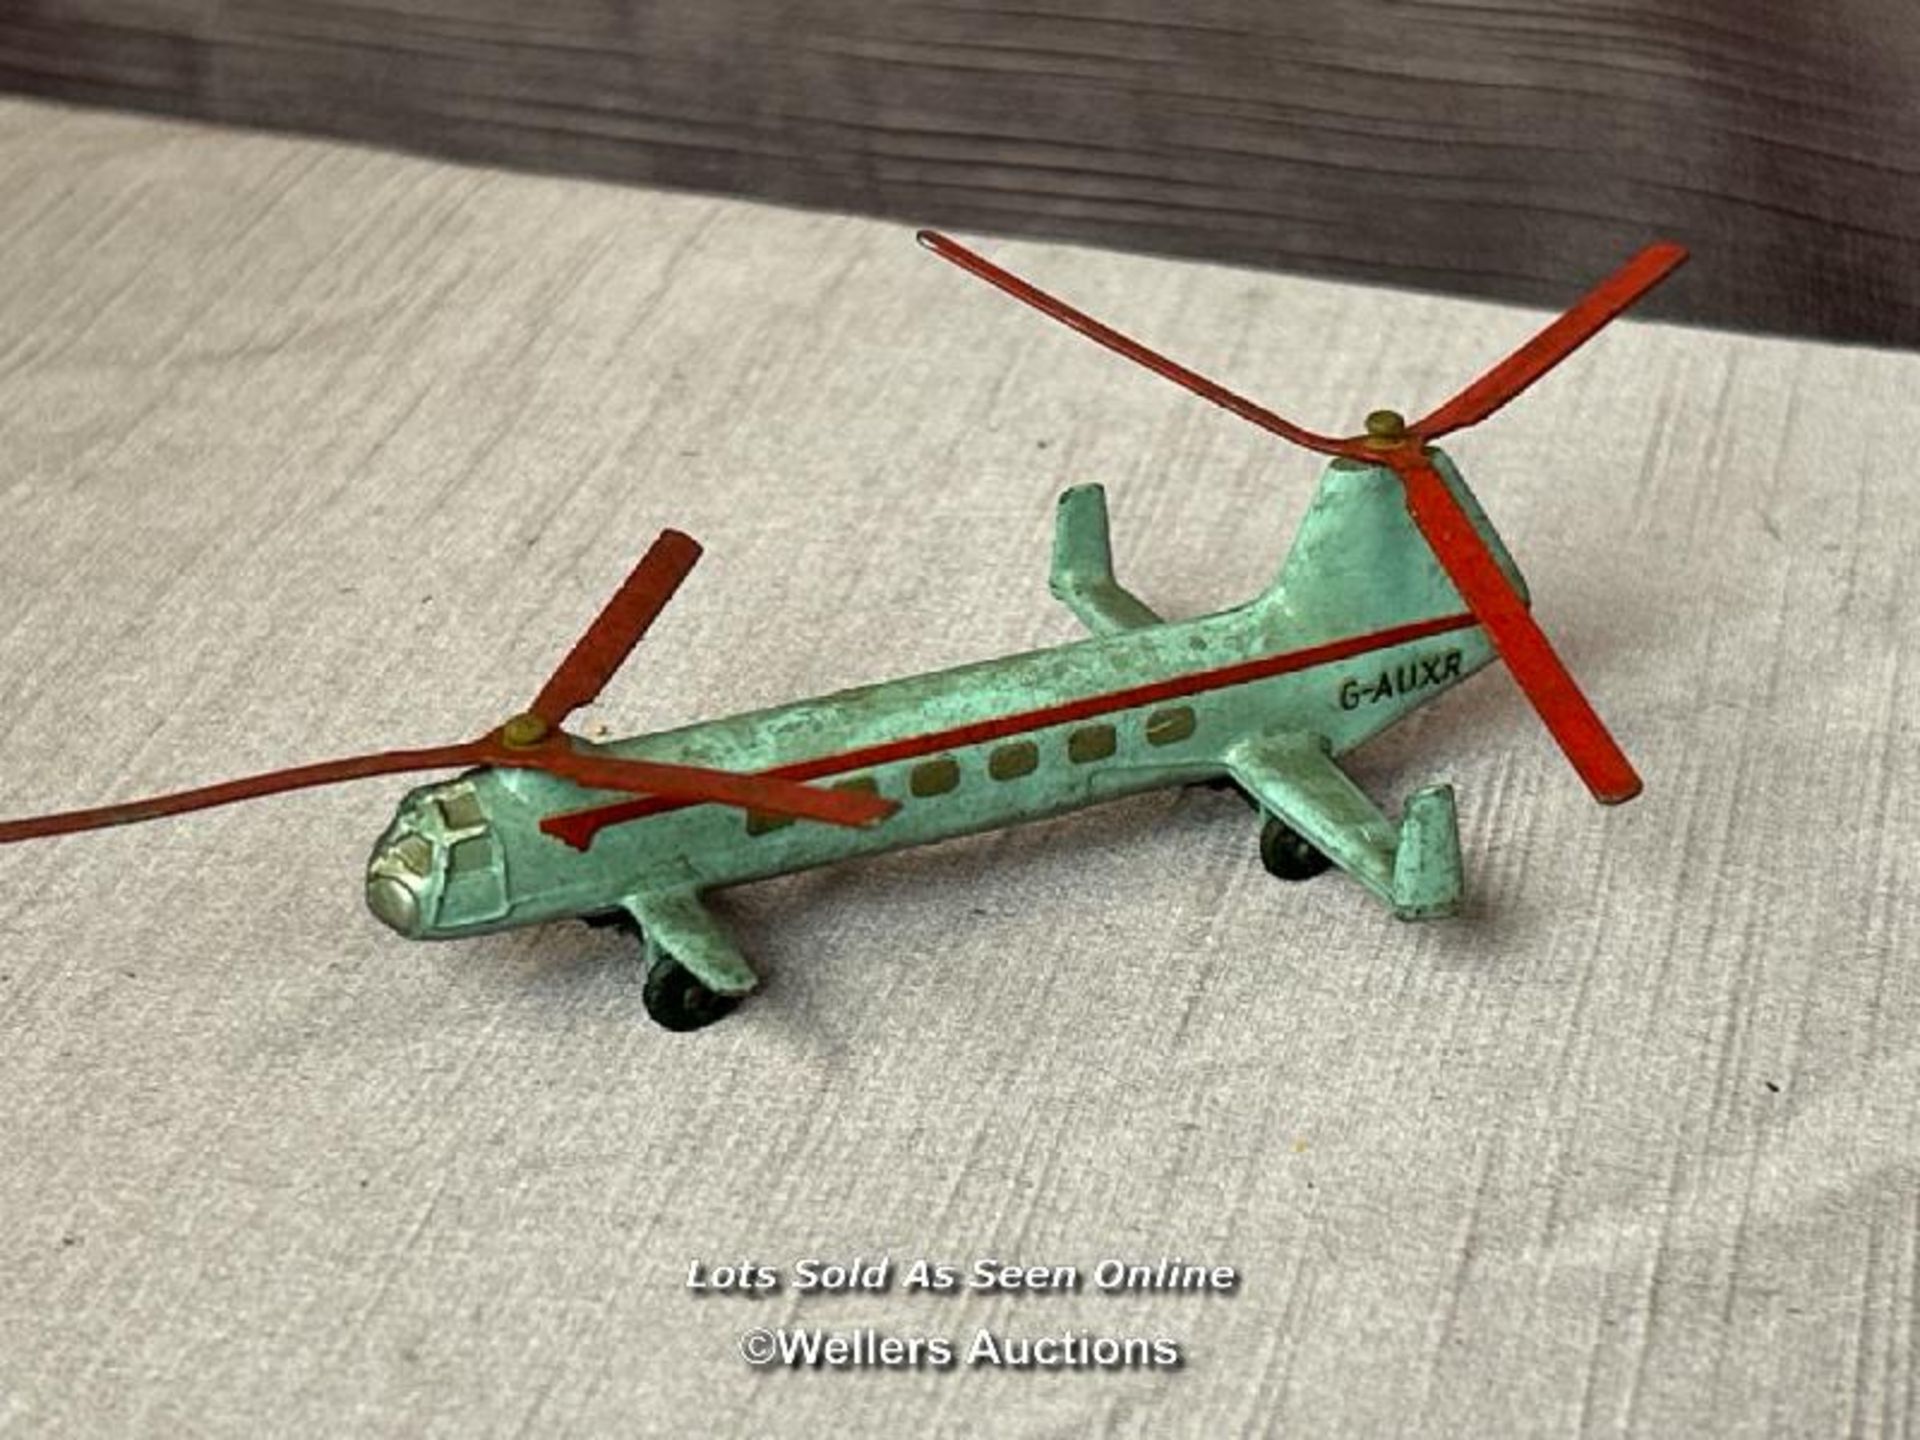 SELECTION OF DINKY DIE CAST PLANES AND A HELICOPTER - Image 12 of 14